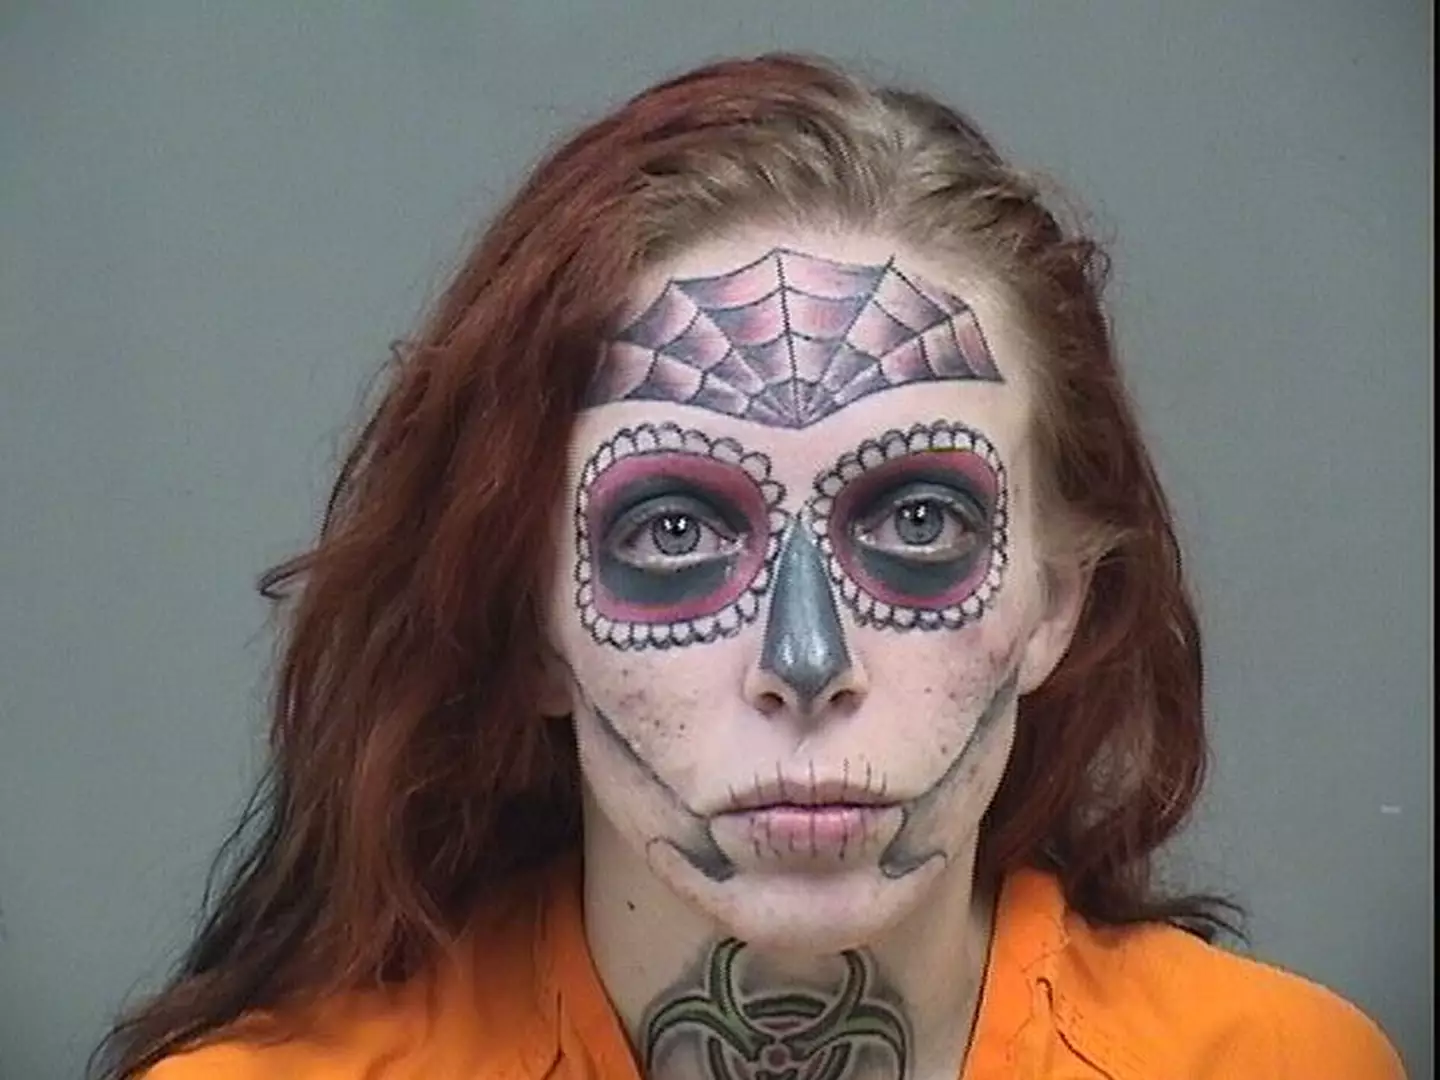 Following the tattoo, Alyssa was arrested - and ended up having her mugshot taken.